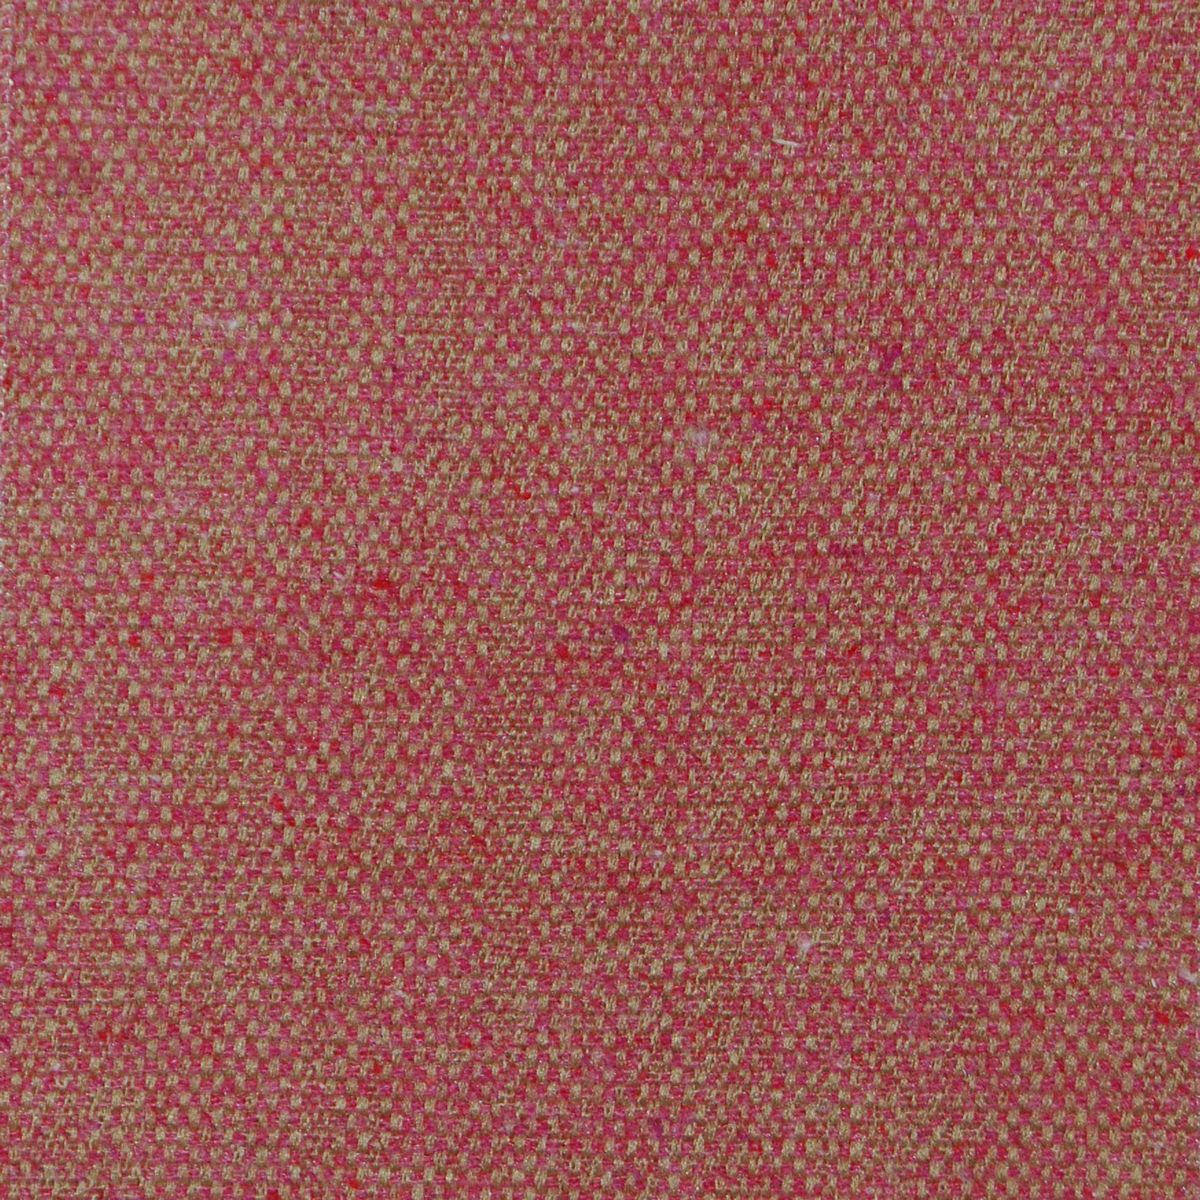 Selkirk Raspberry Fabric by Voyage Maison